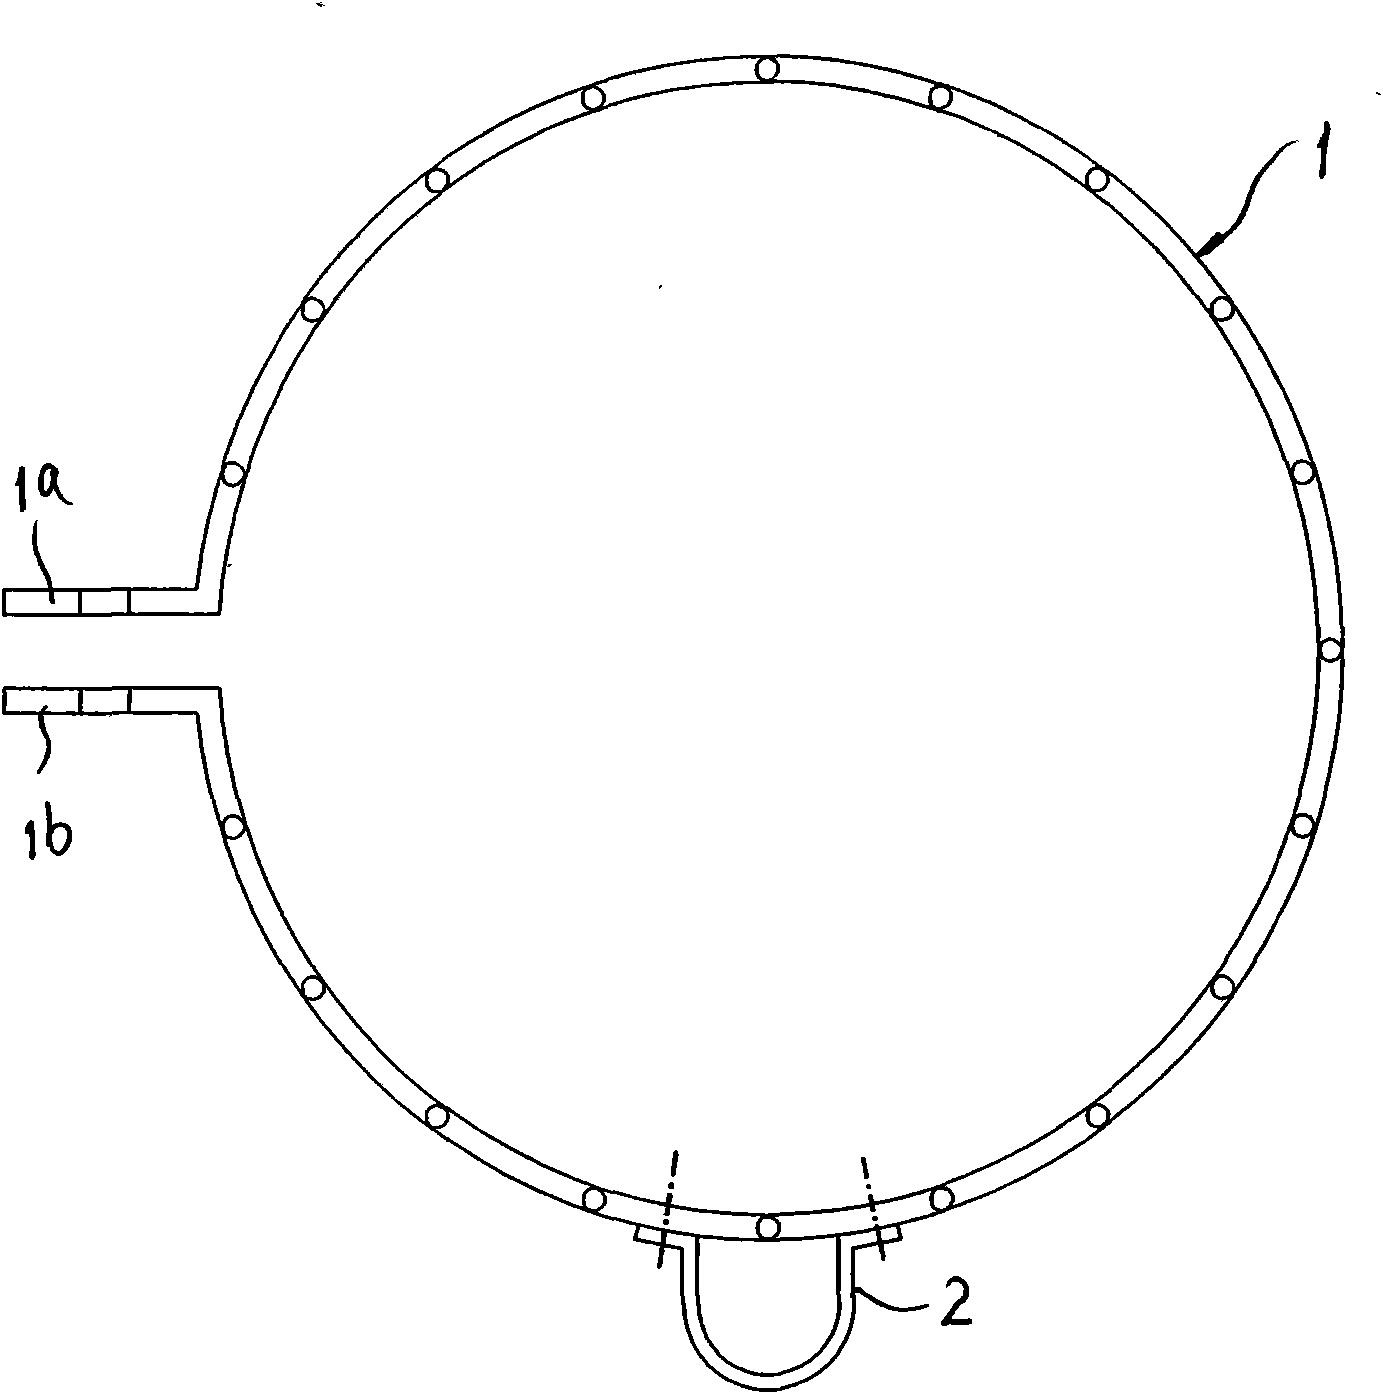 Device for cable conduits in urban distribution networks